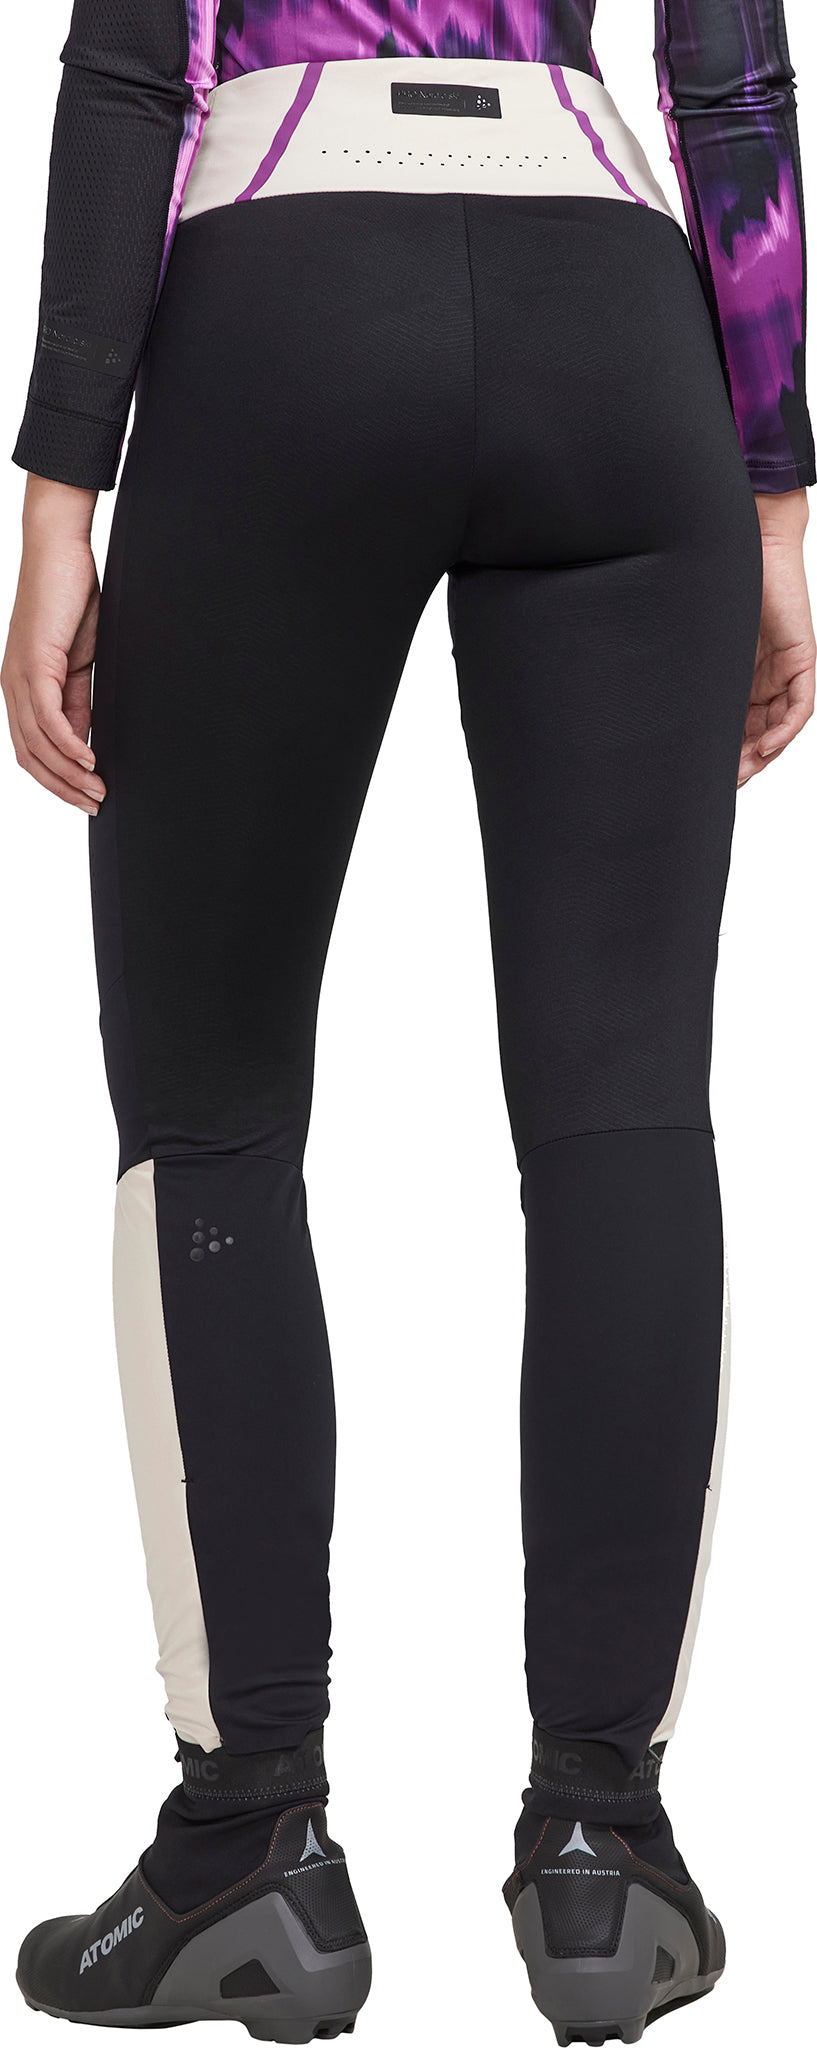 Rossignol Soft Shell Pant - Women's